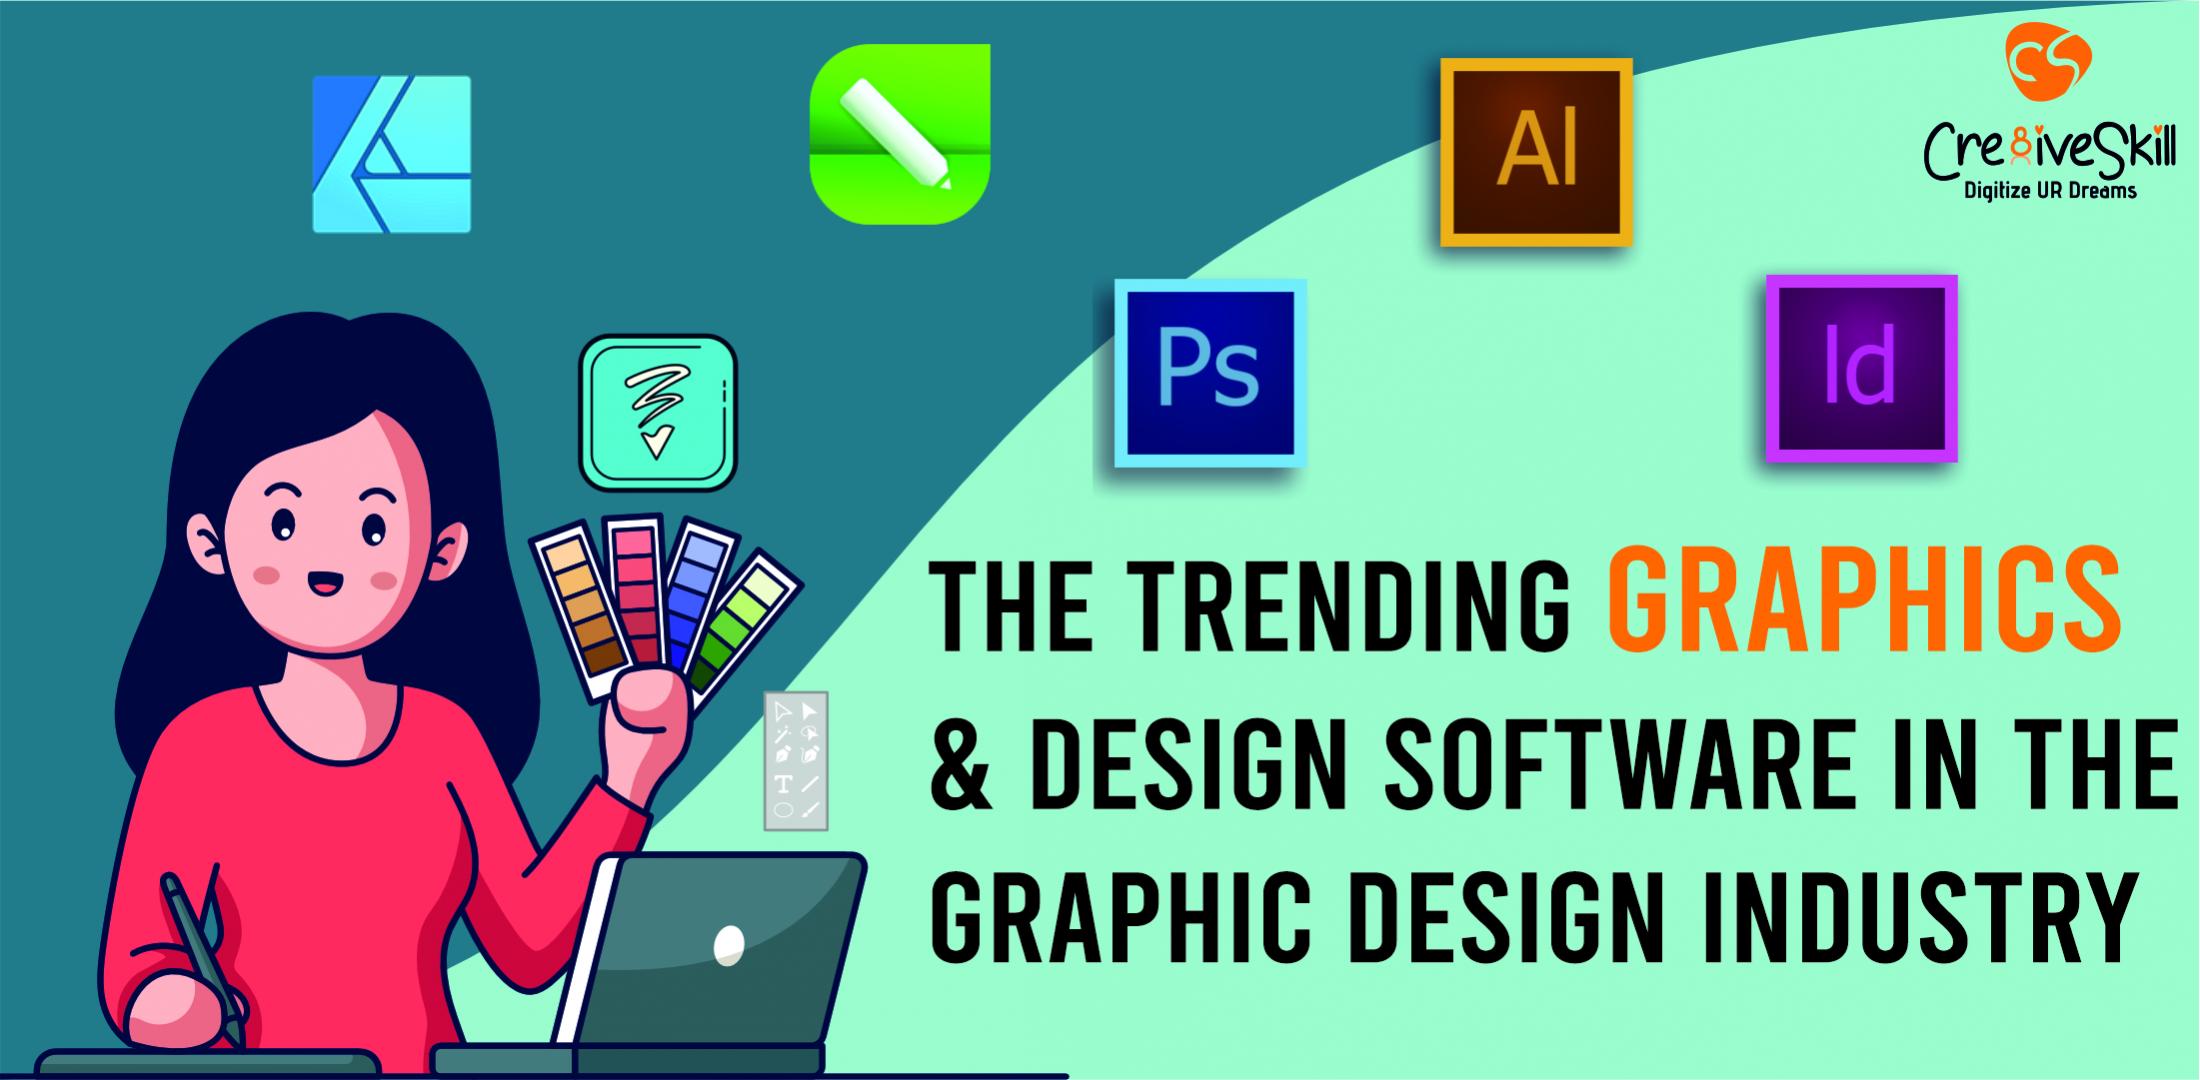 What Software Graphic Designers Use